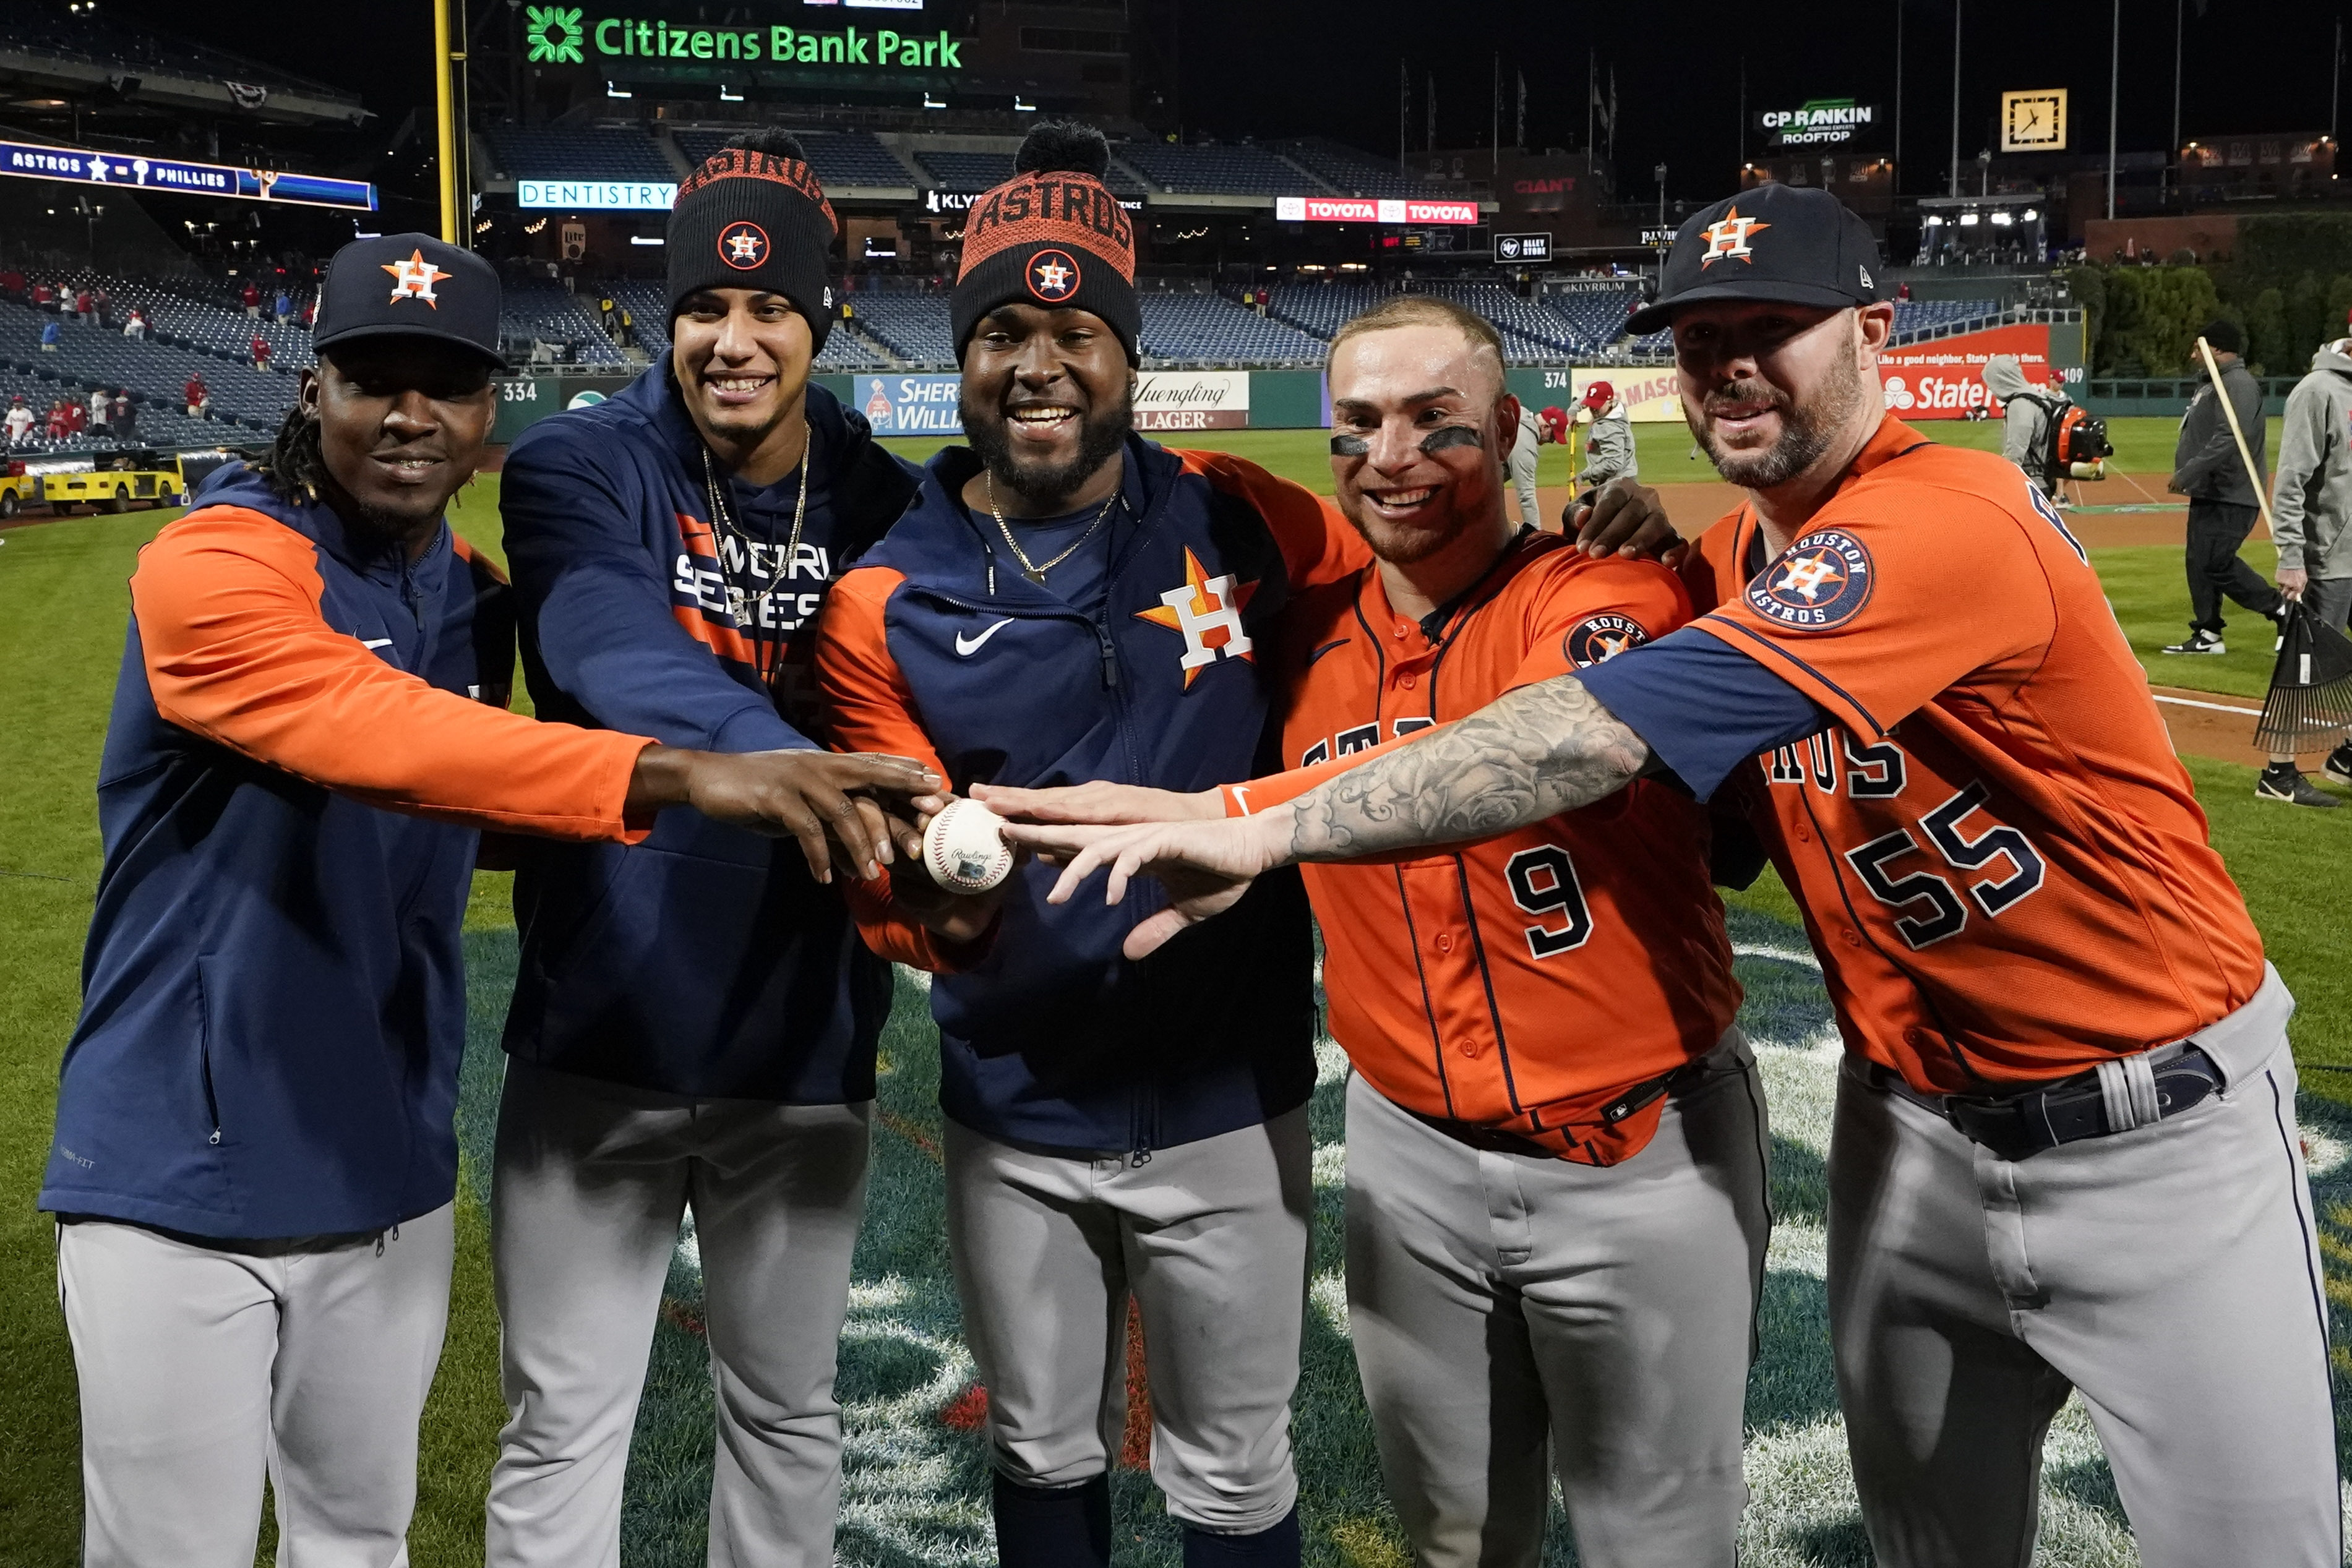 Cristian Javier, Astros pitch 2nd no-hitter in World Series history